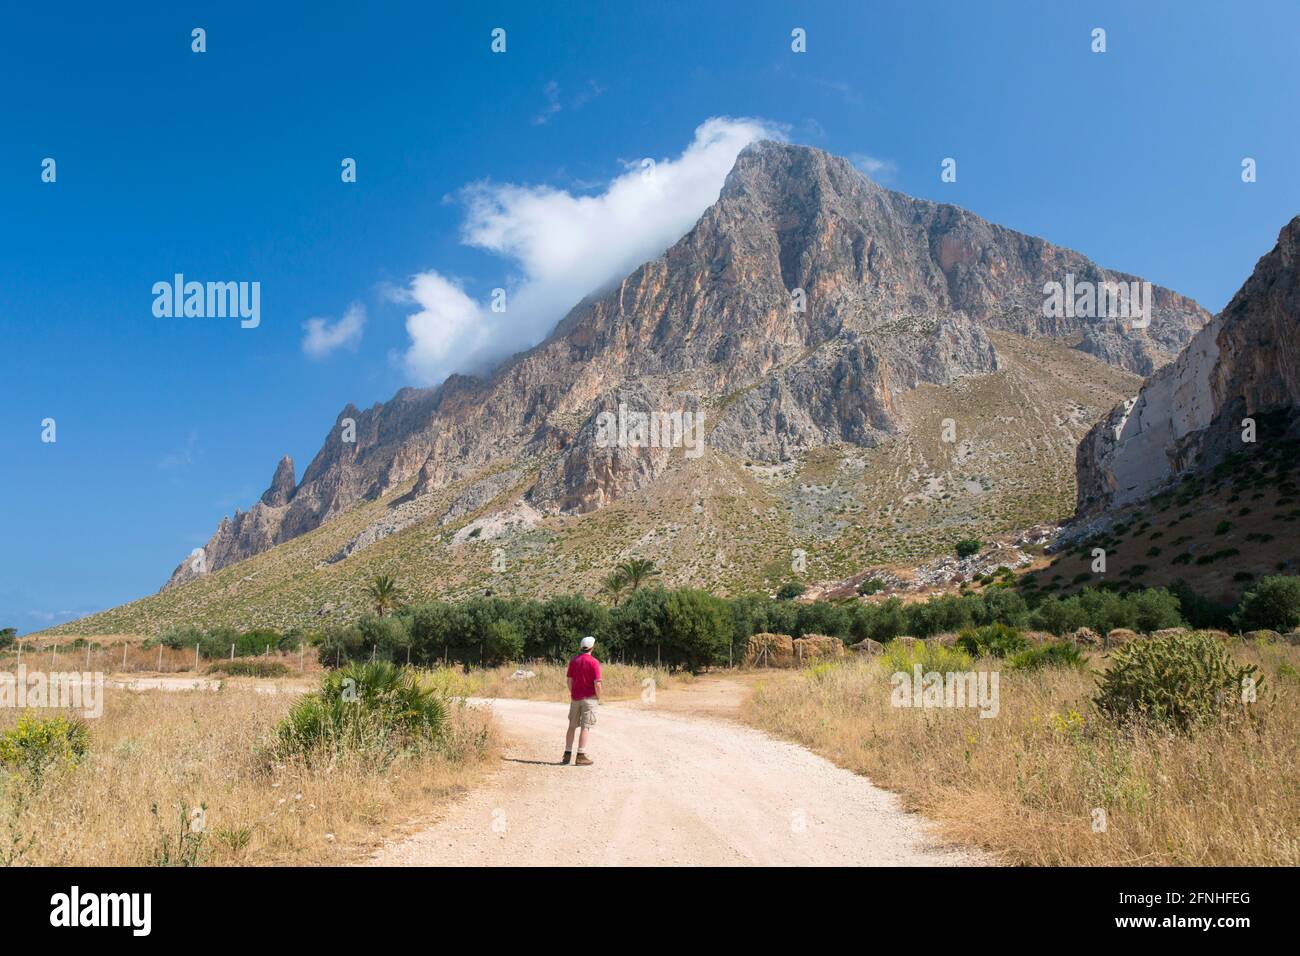 Custonaci, Trapani, Sicily, Italy. Solitary visitor on dusty track between fields admiring view of the towering south face of Monte Cofano. Stock Photo